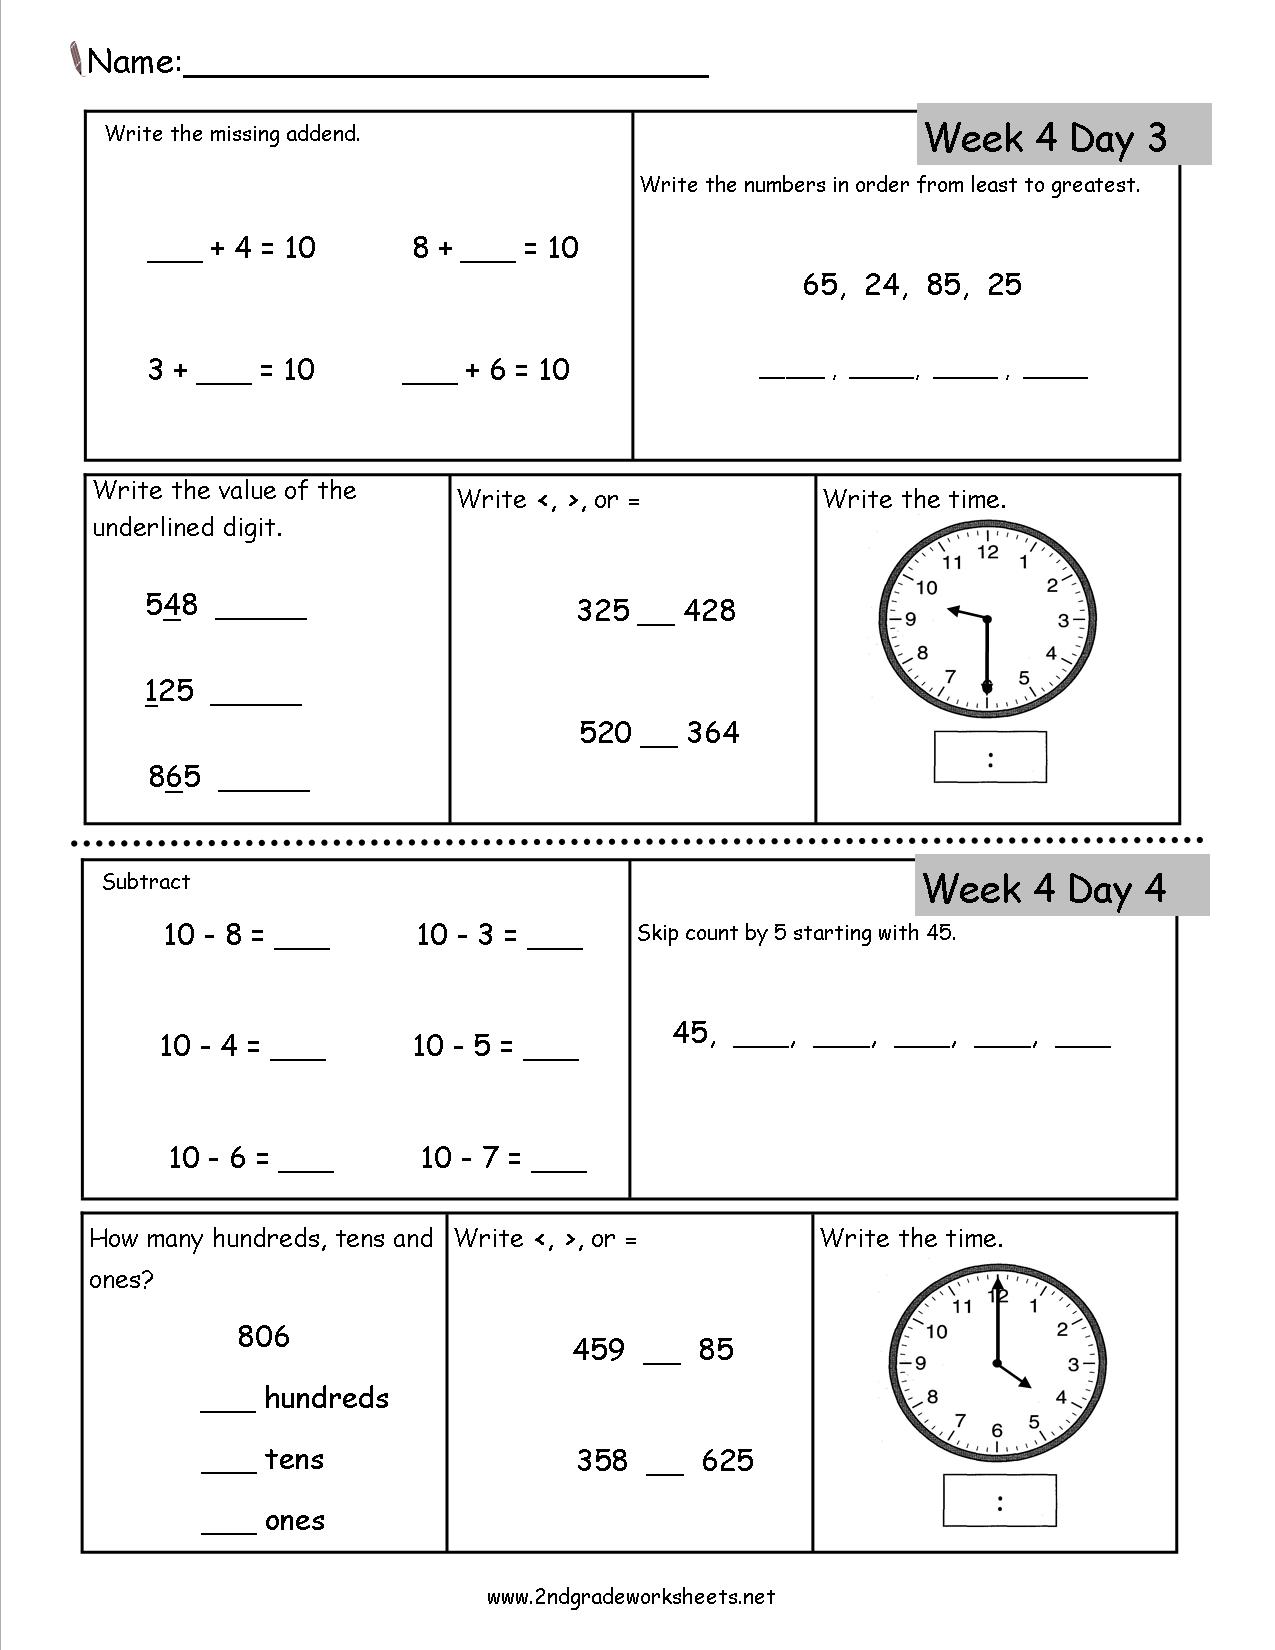 43-second-grade-common-core-math-worksheets-best-place-to-learning